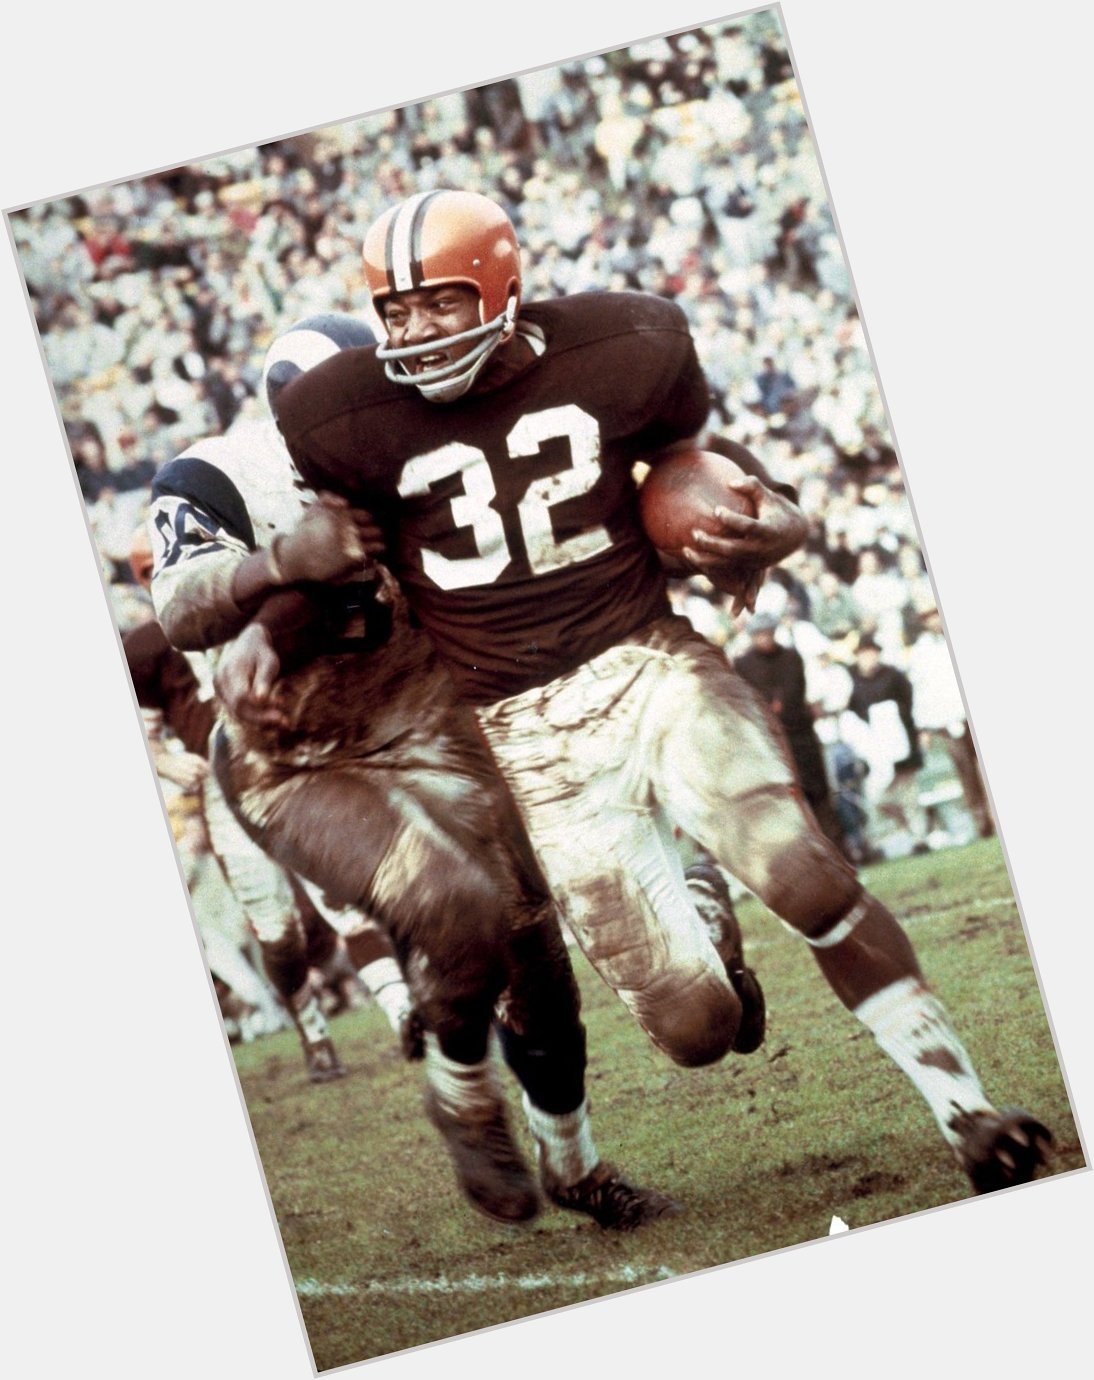 Happy Birthday to Jim Brown, who turns 81 today! 